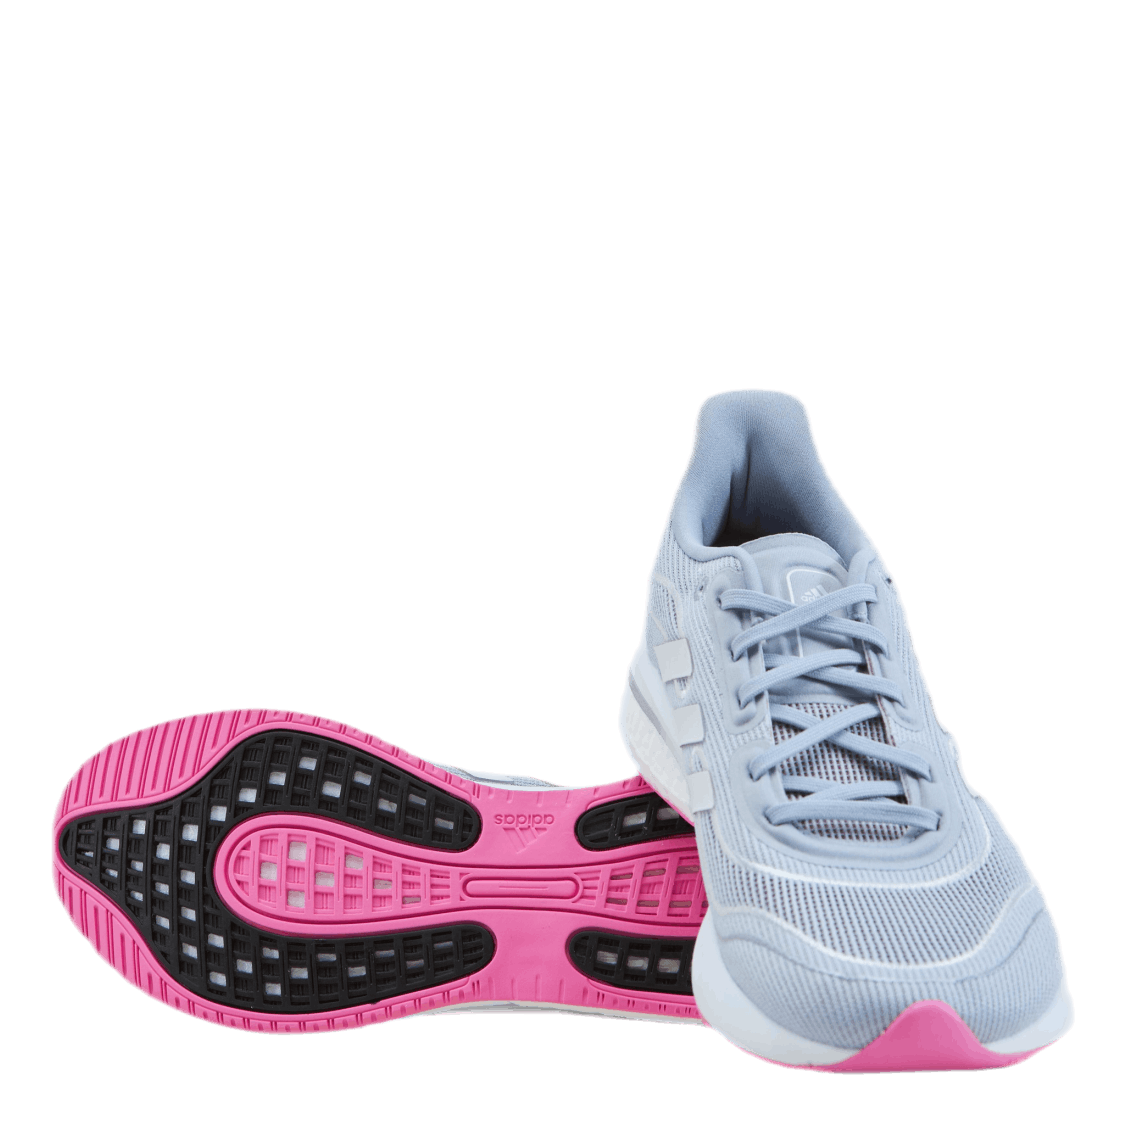 Supernova Shoes Halo Silver / Cloud White / Screaming Pink